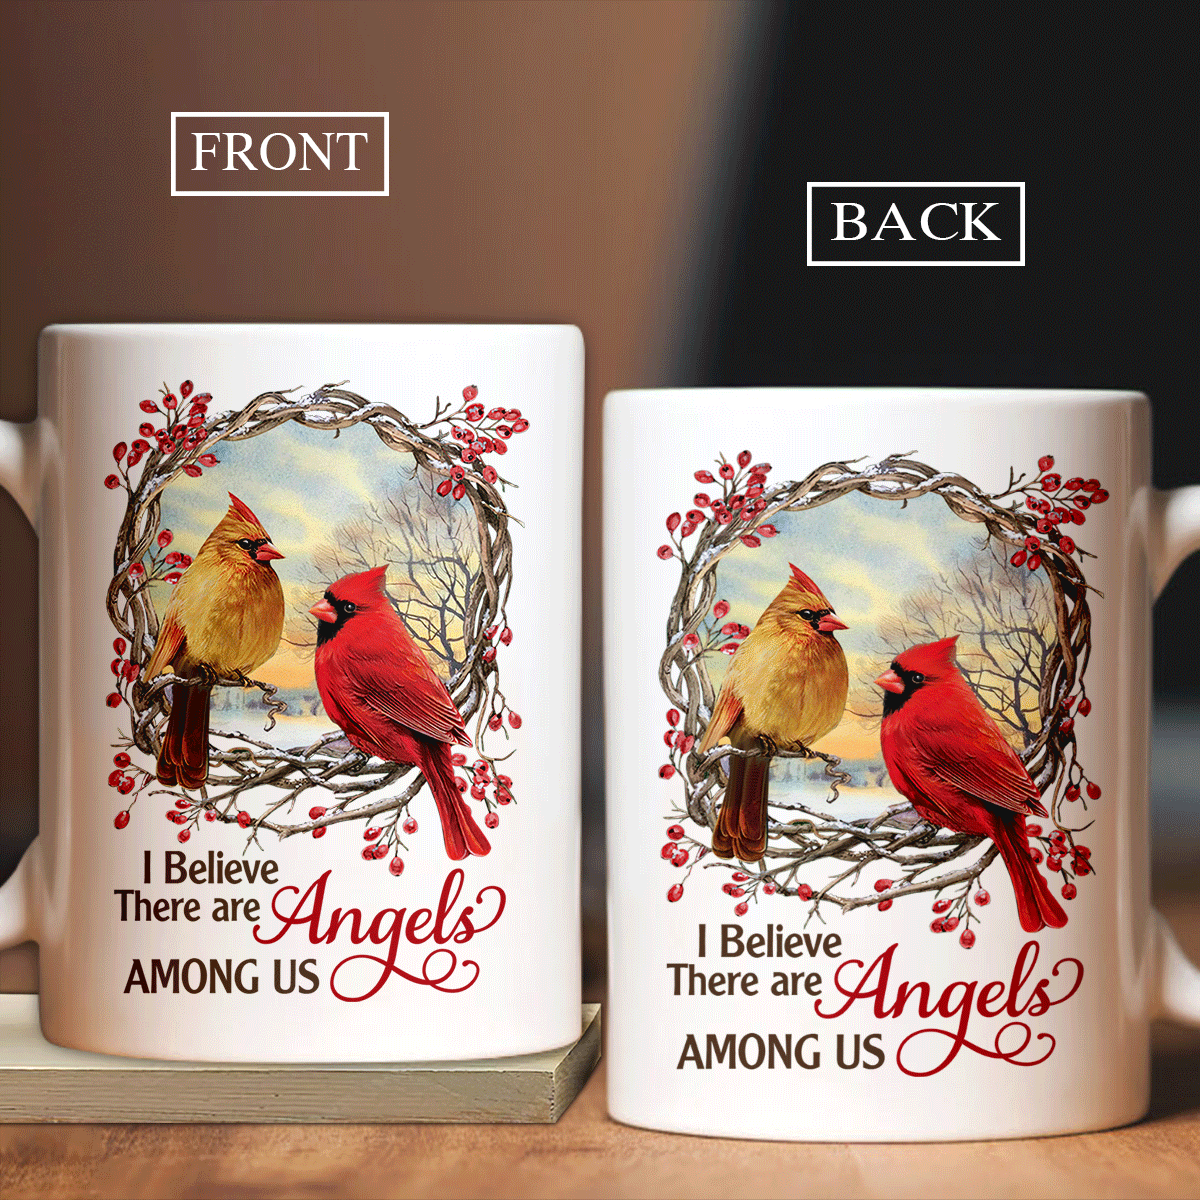 Memorial White Mug - Cranberry wreath, Beautiful sunset, Cardinal drawing - Gift for members family - I believe there are angels among us Heaven Mug